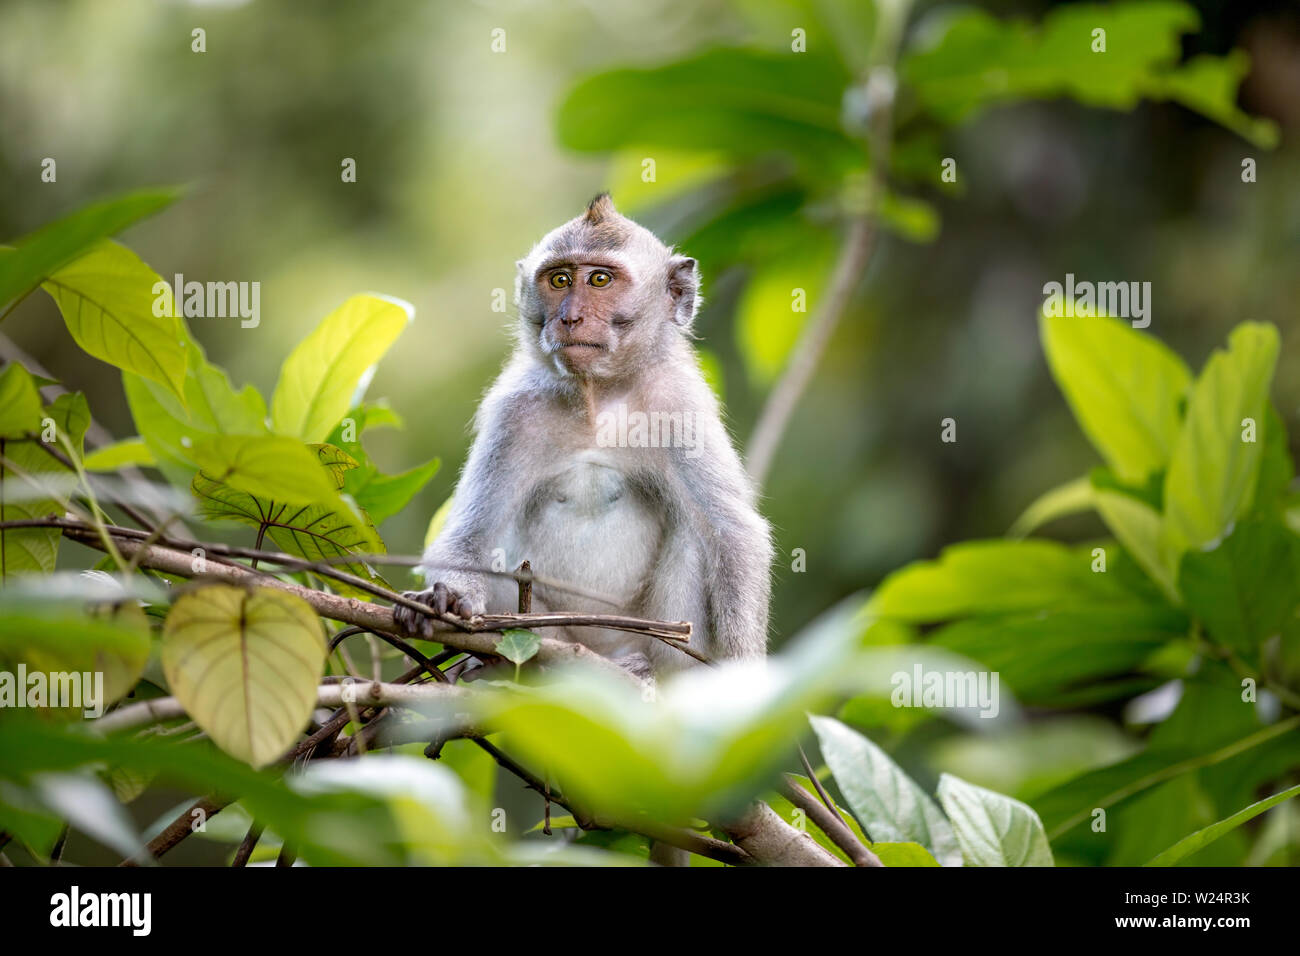 Long-tailed Macaque Monkey in the Monkey forest in Bali Stock Photo